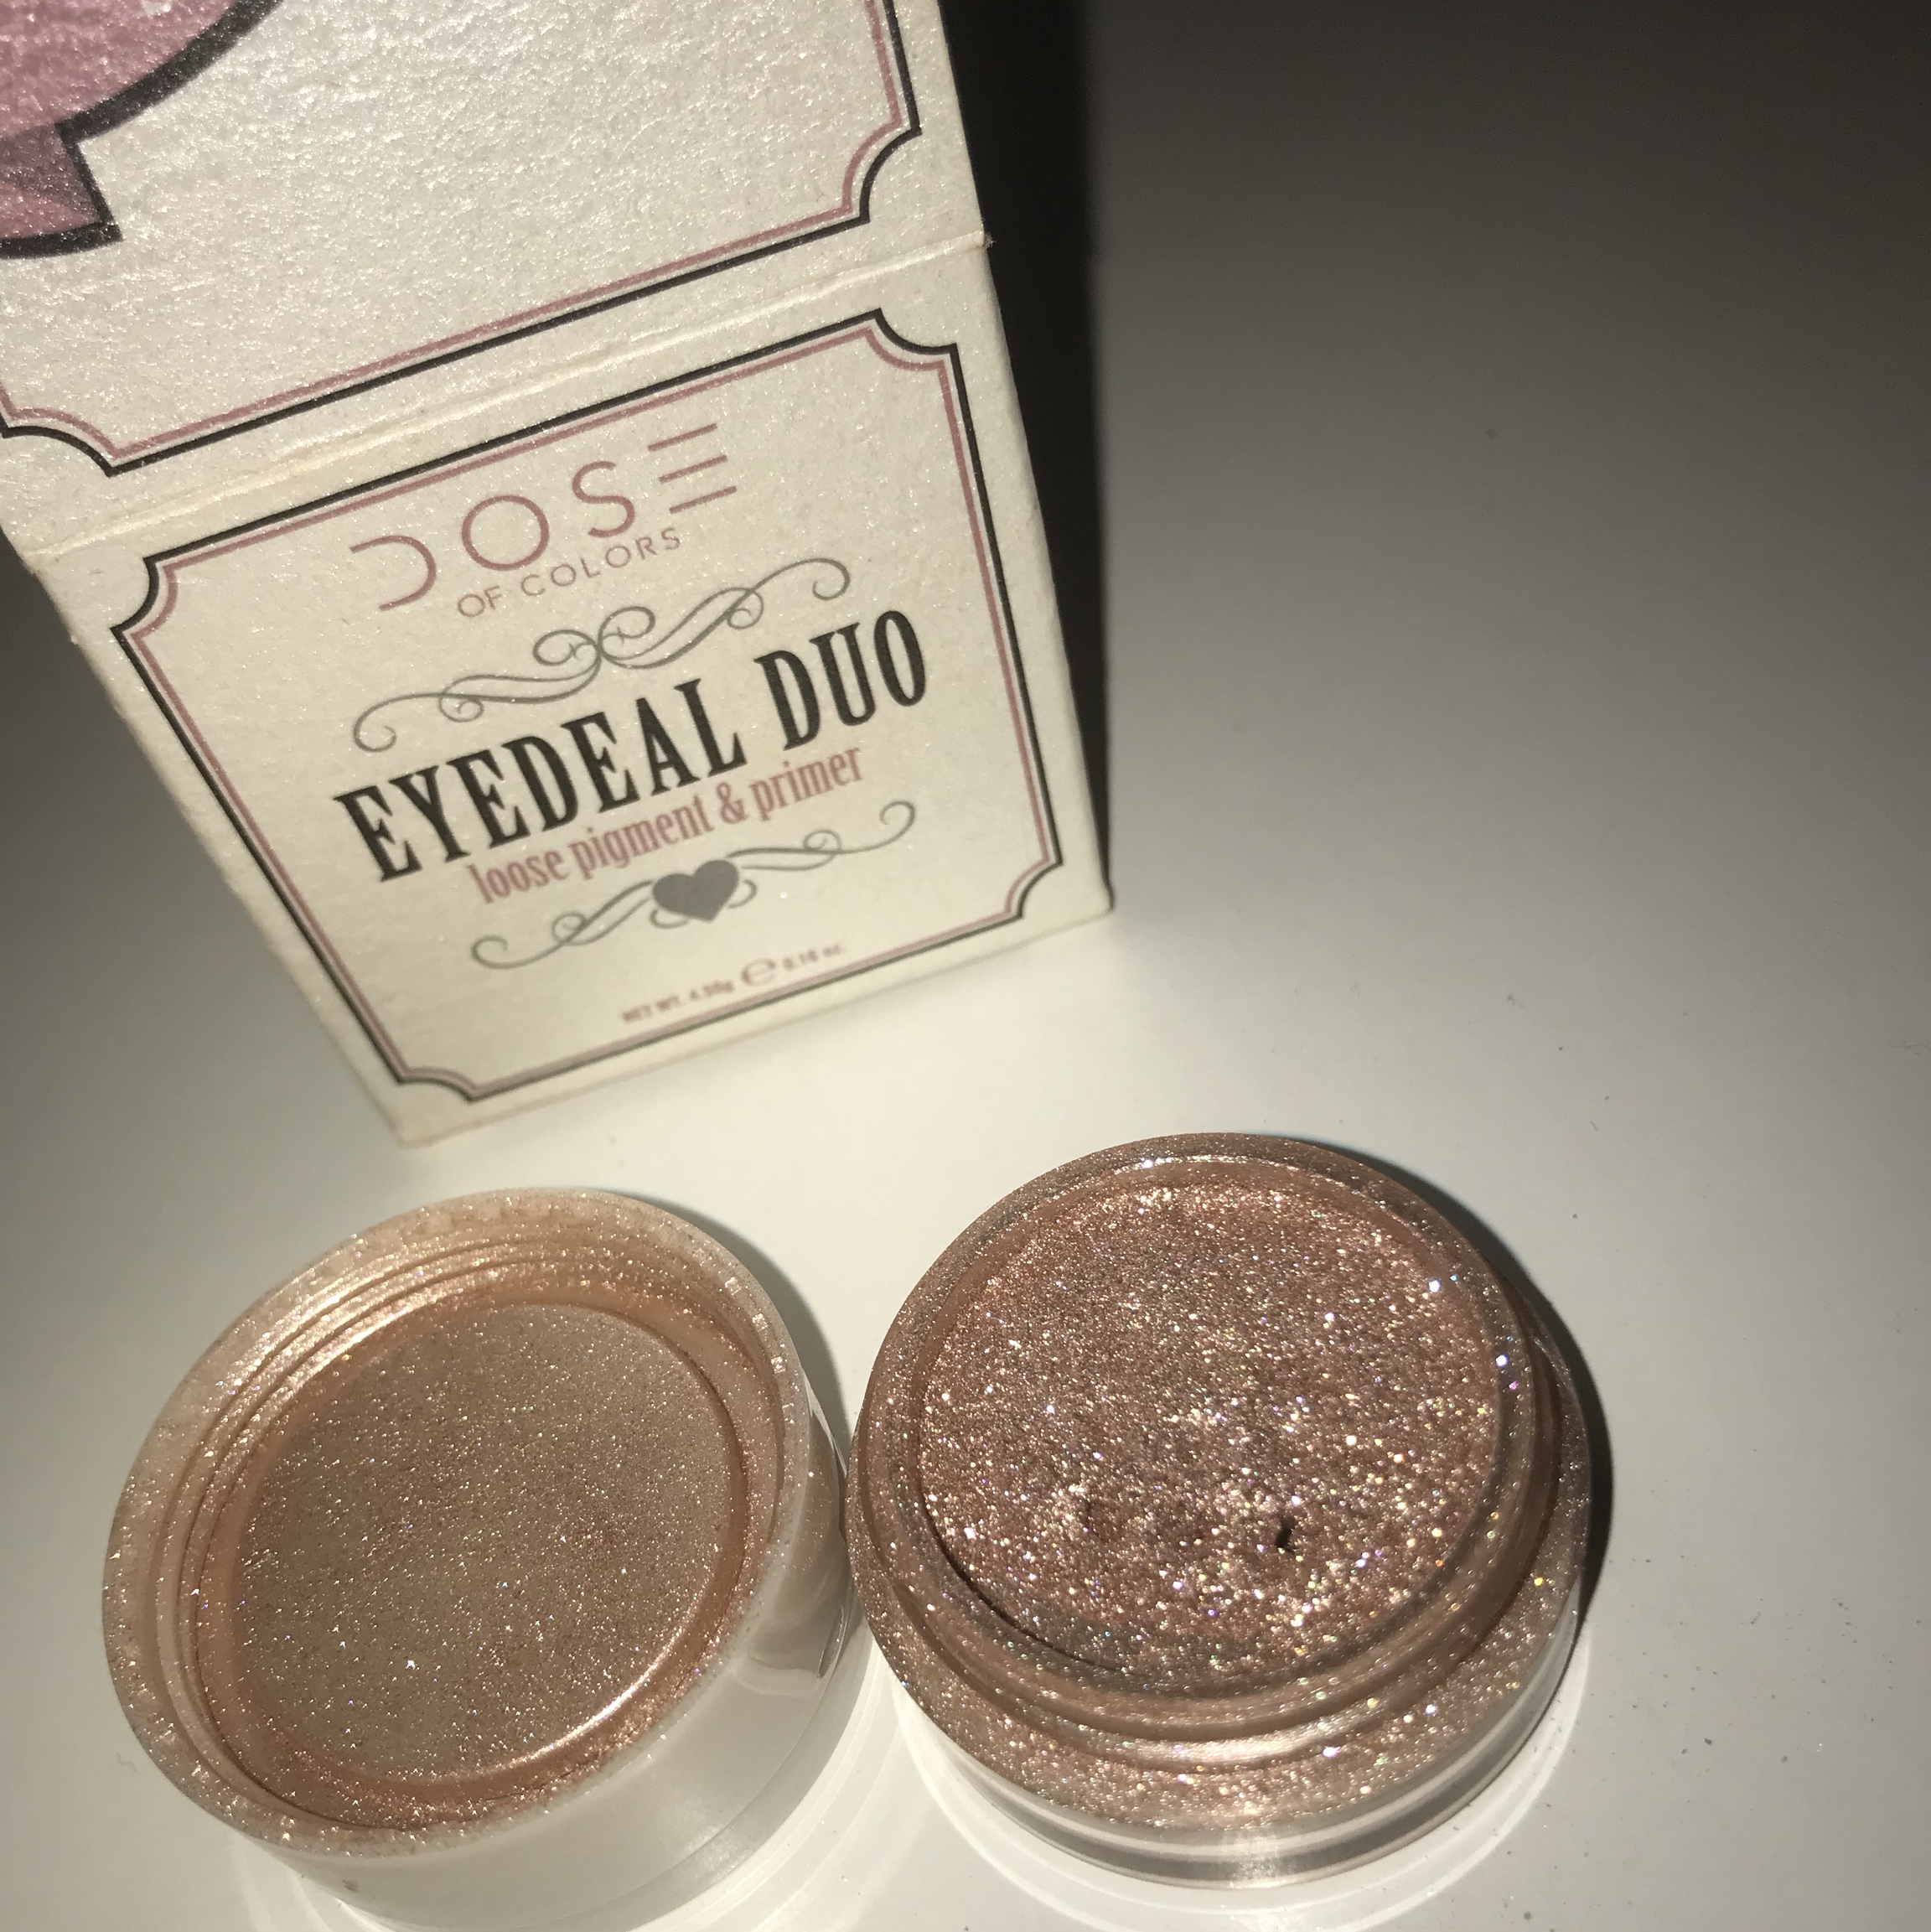 Dose Of Colors Eyedeal Duo Loose Pigment &amp; Primer Sunset